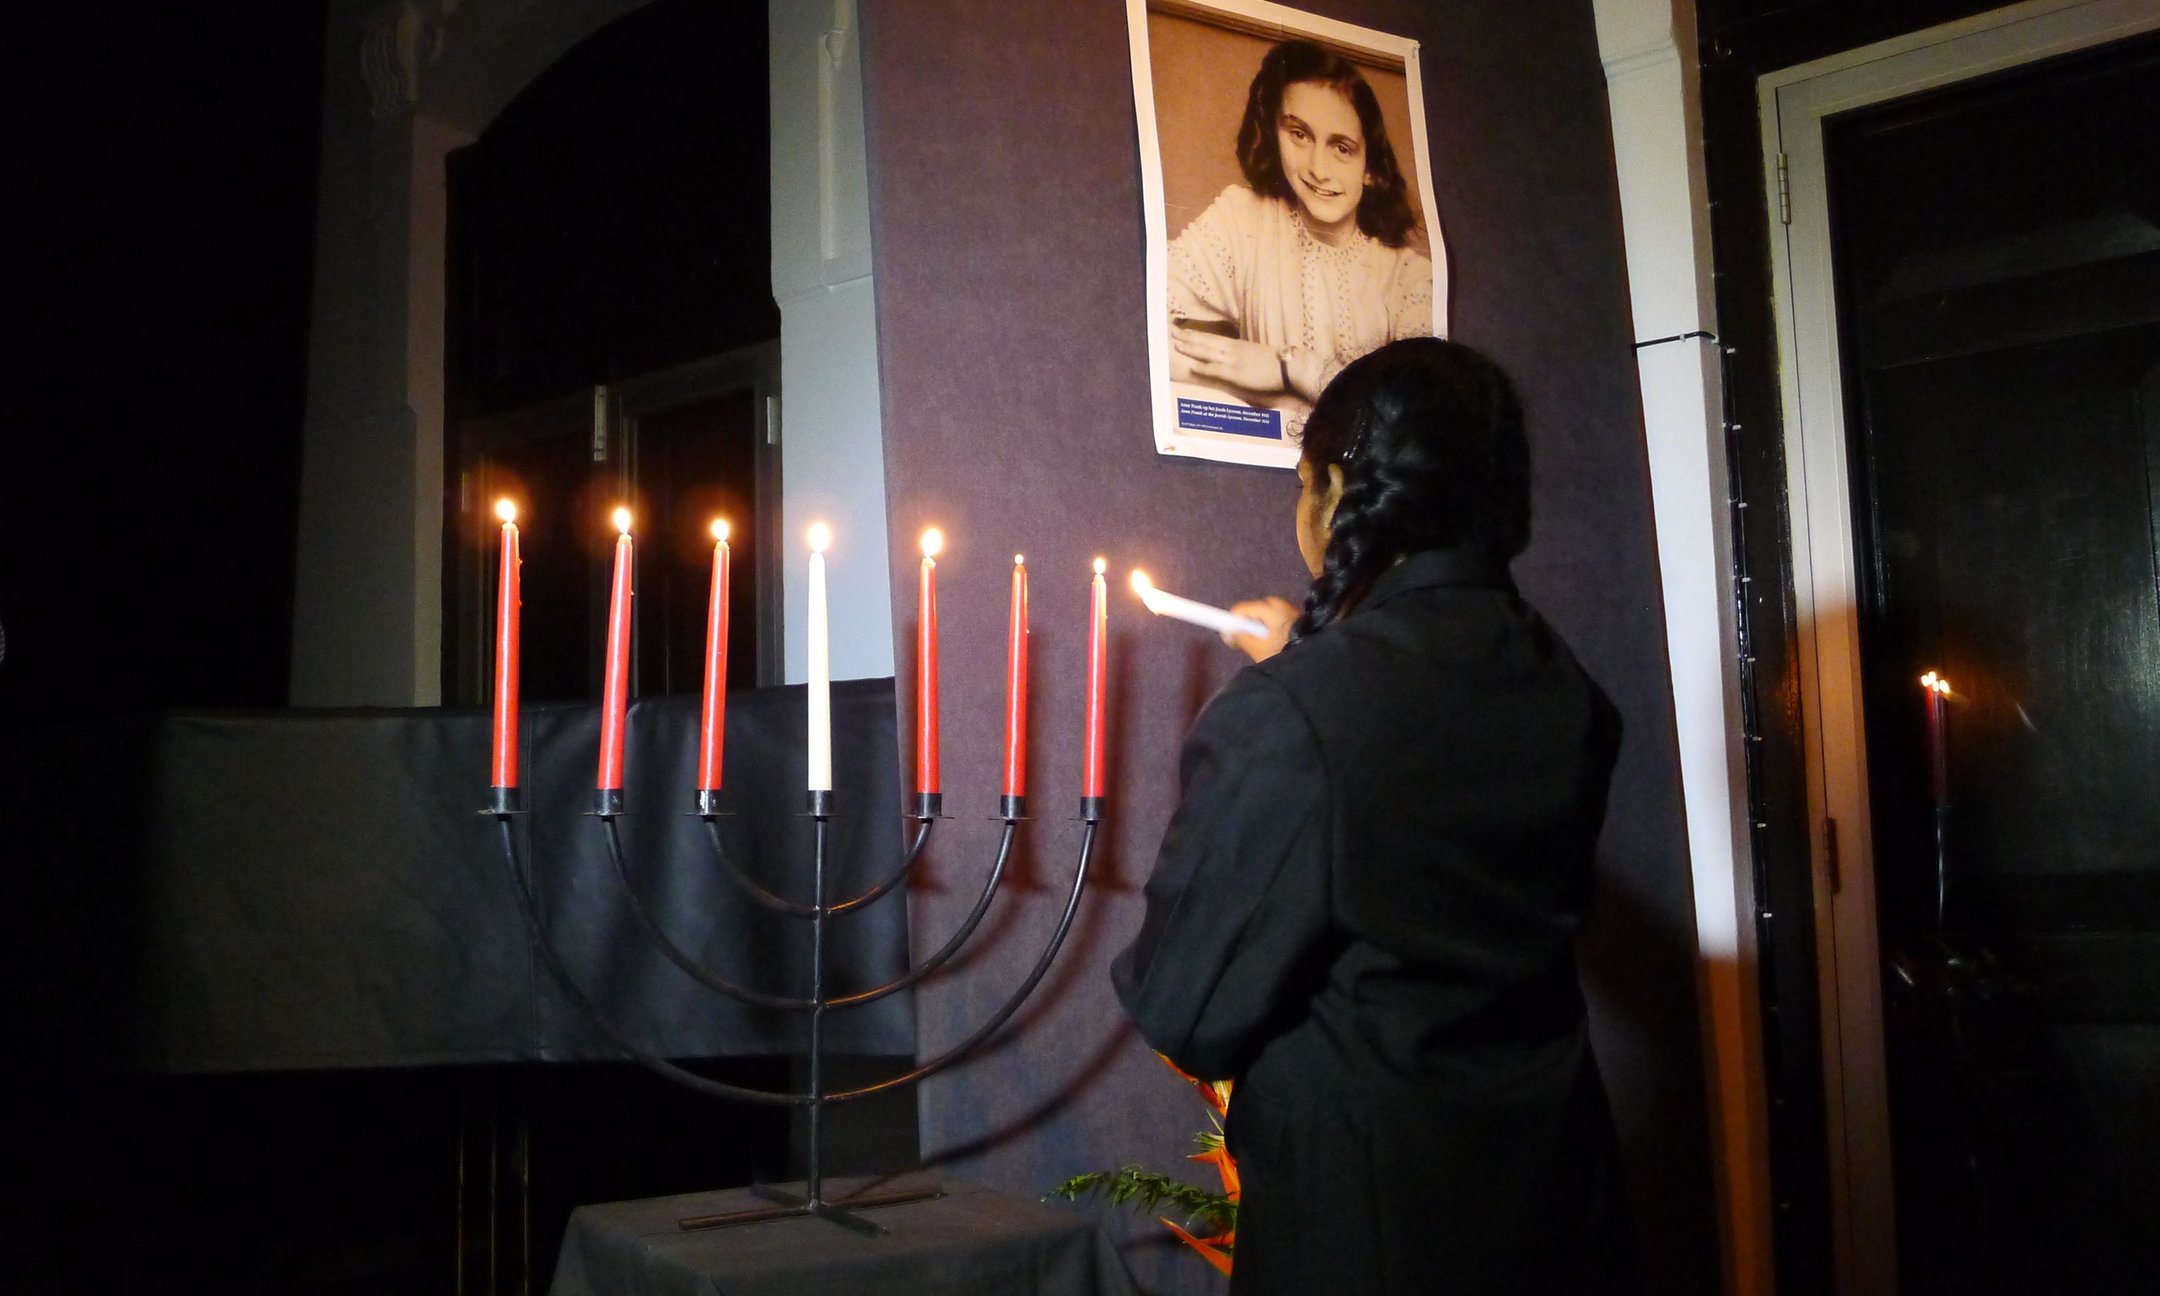 Peer guide lighting the Menorah during the opening ceremony in Colombo (2015)